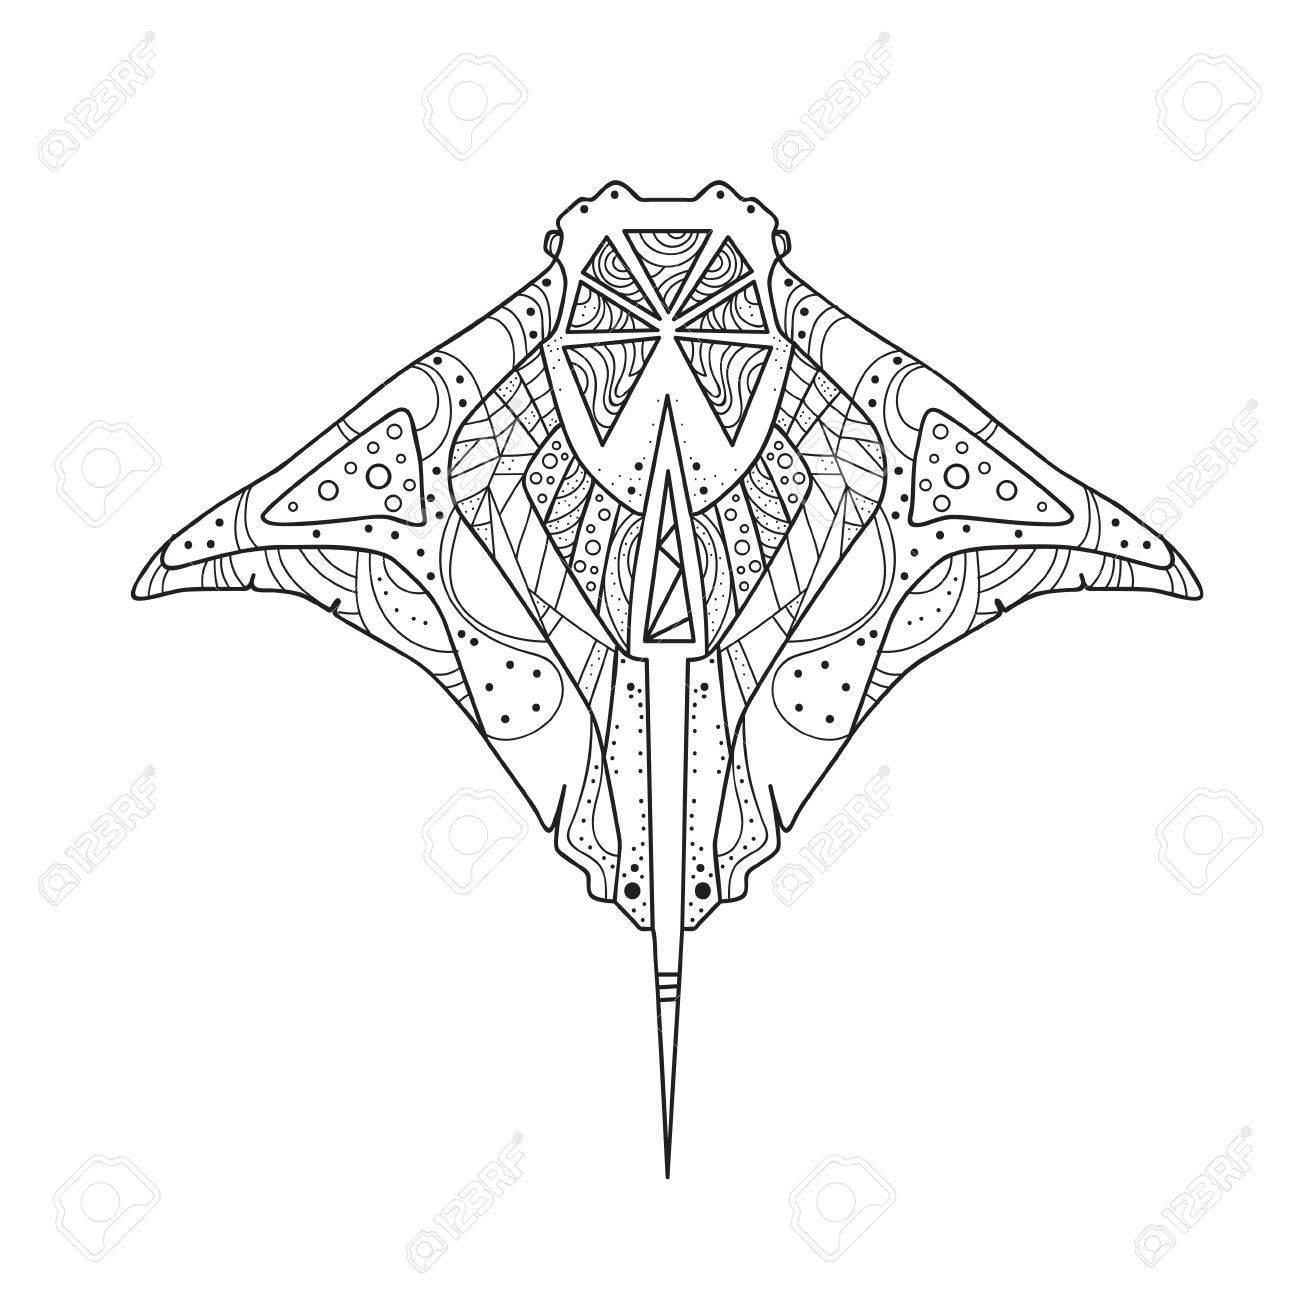 Skate hand drawing zentangle fish isolated vector illustration royalty free svg cliparts vectors and stock illustration image